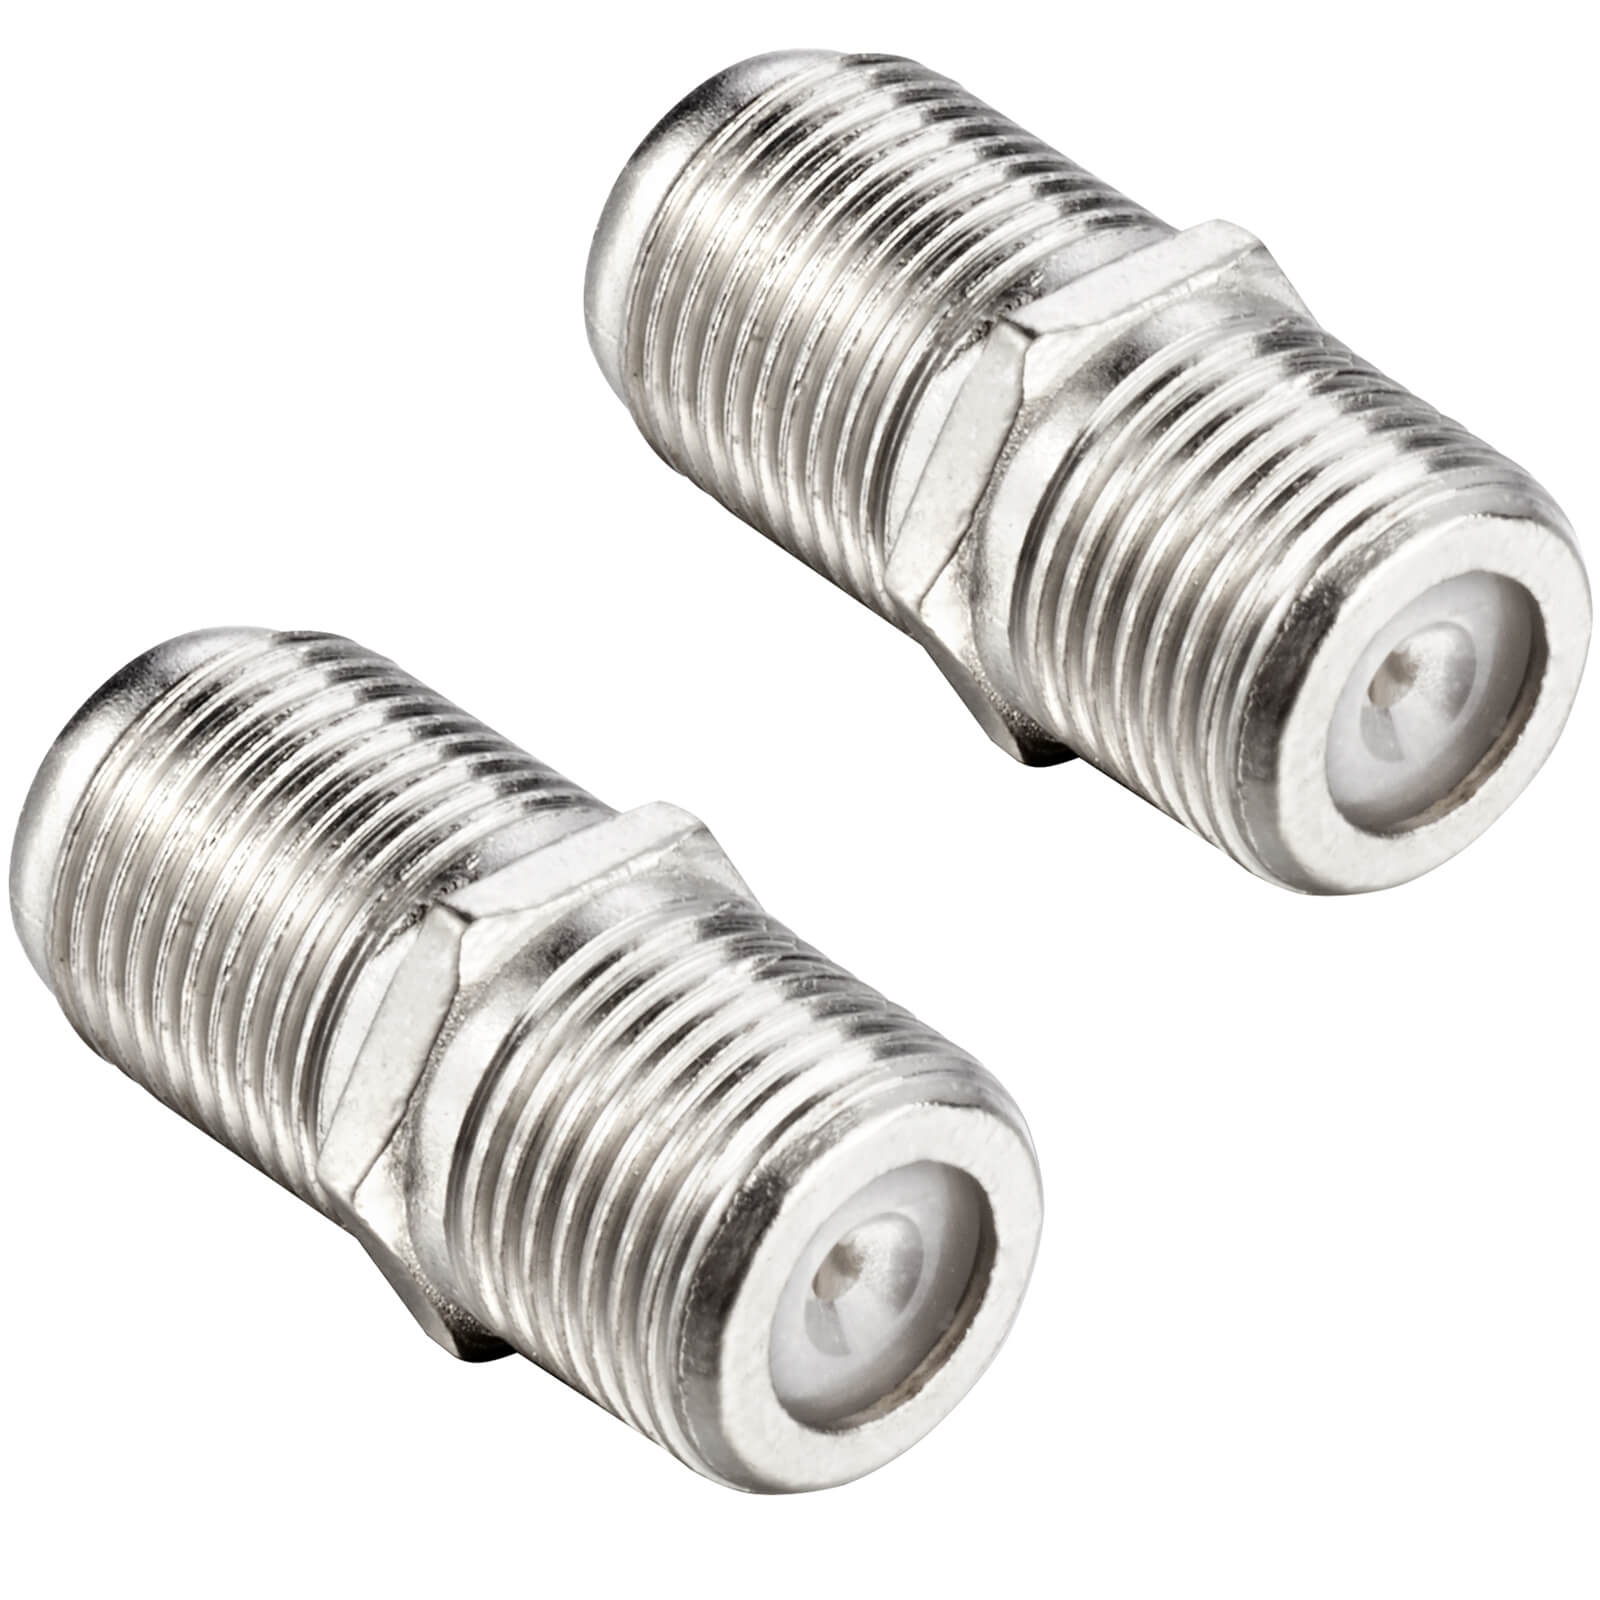 Photo of Ross Satellite Cable Couplers Nickel 2 Pack